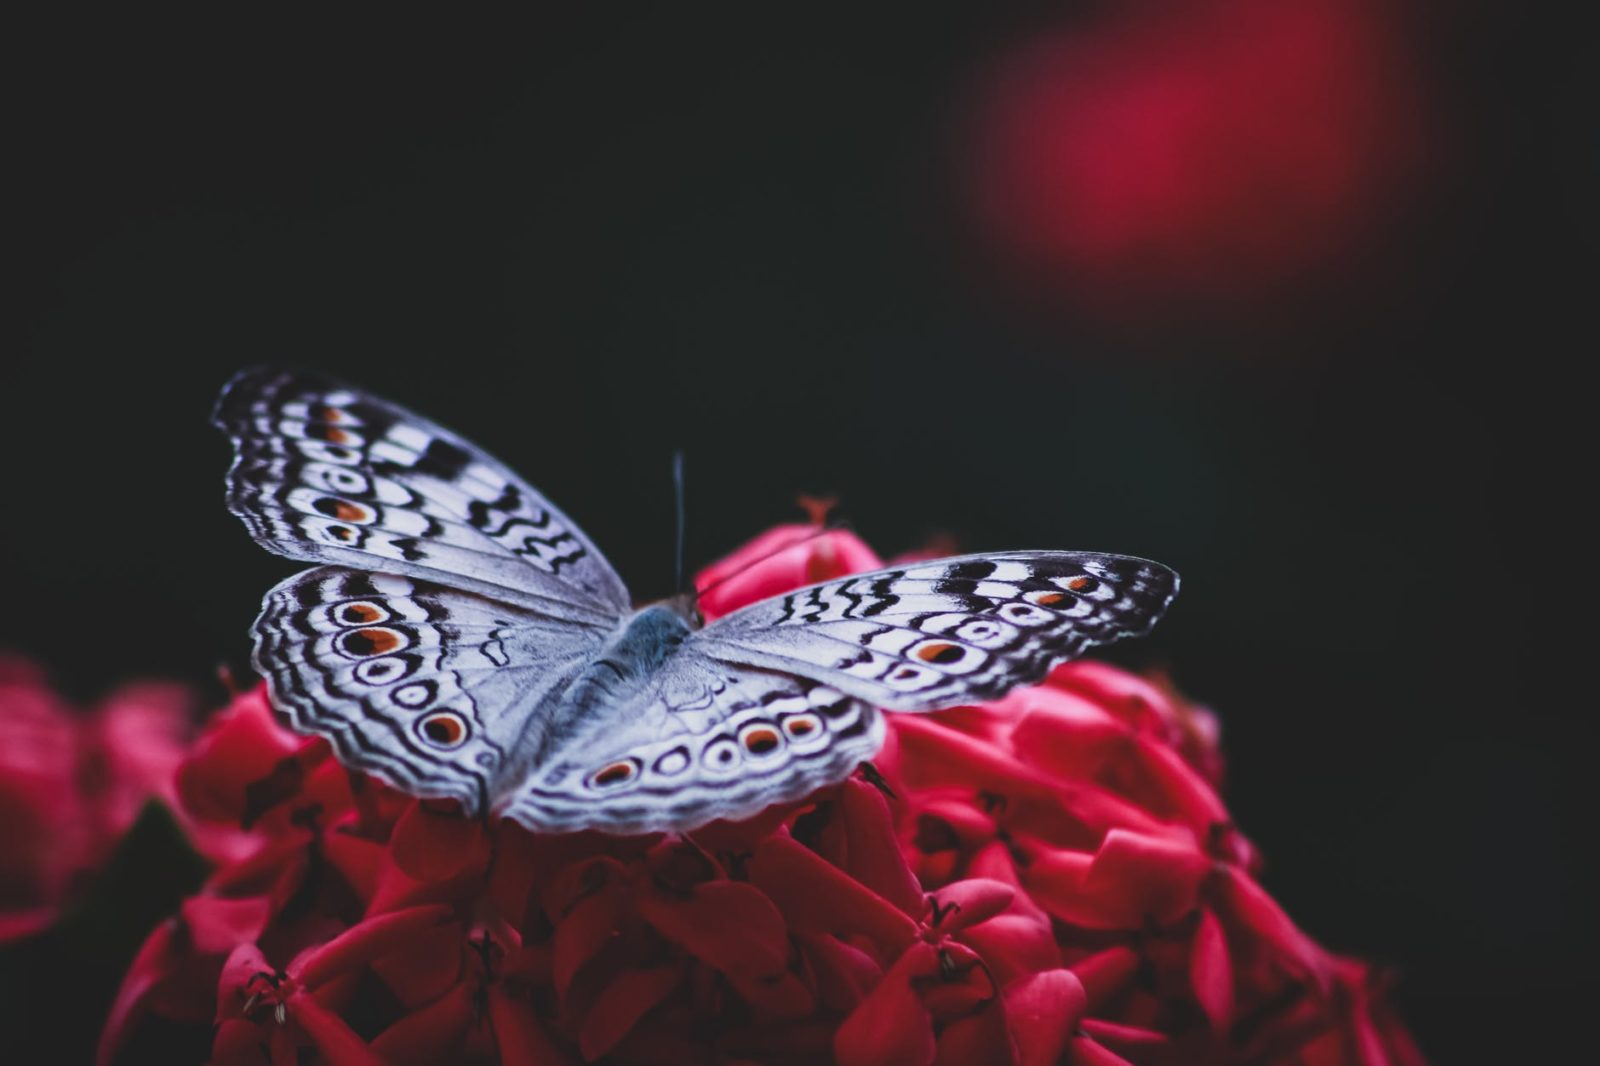 silver and black butterfly on red artificial flower